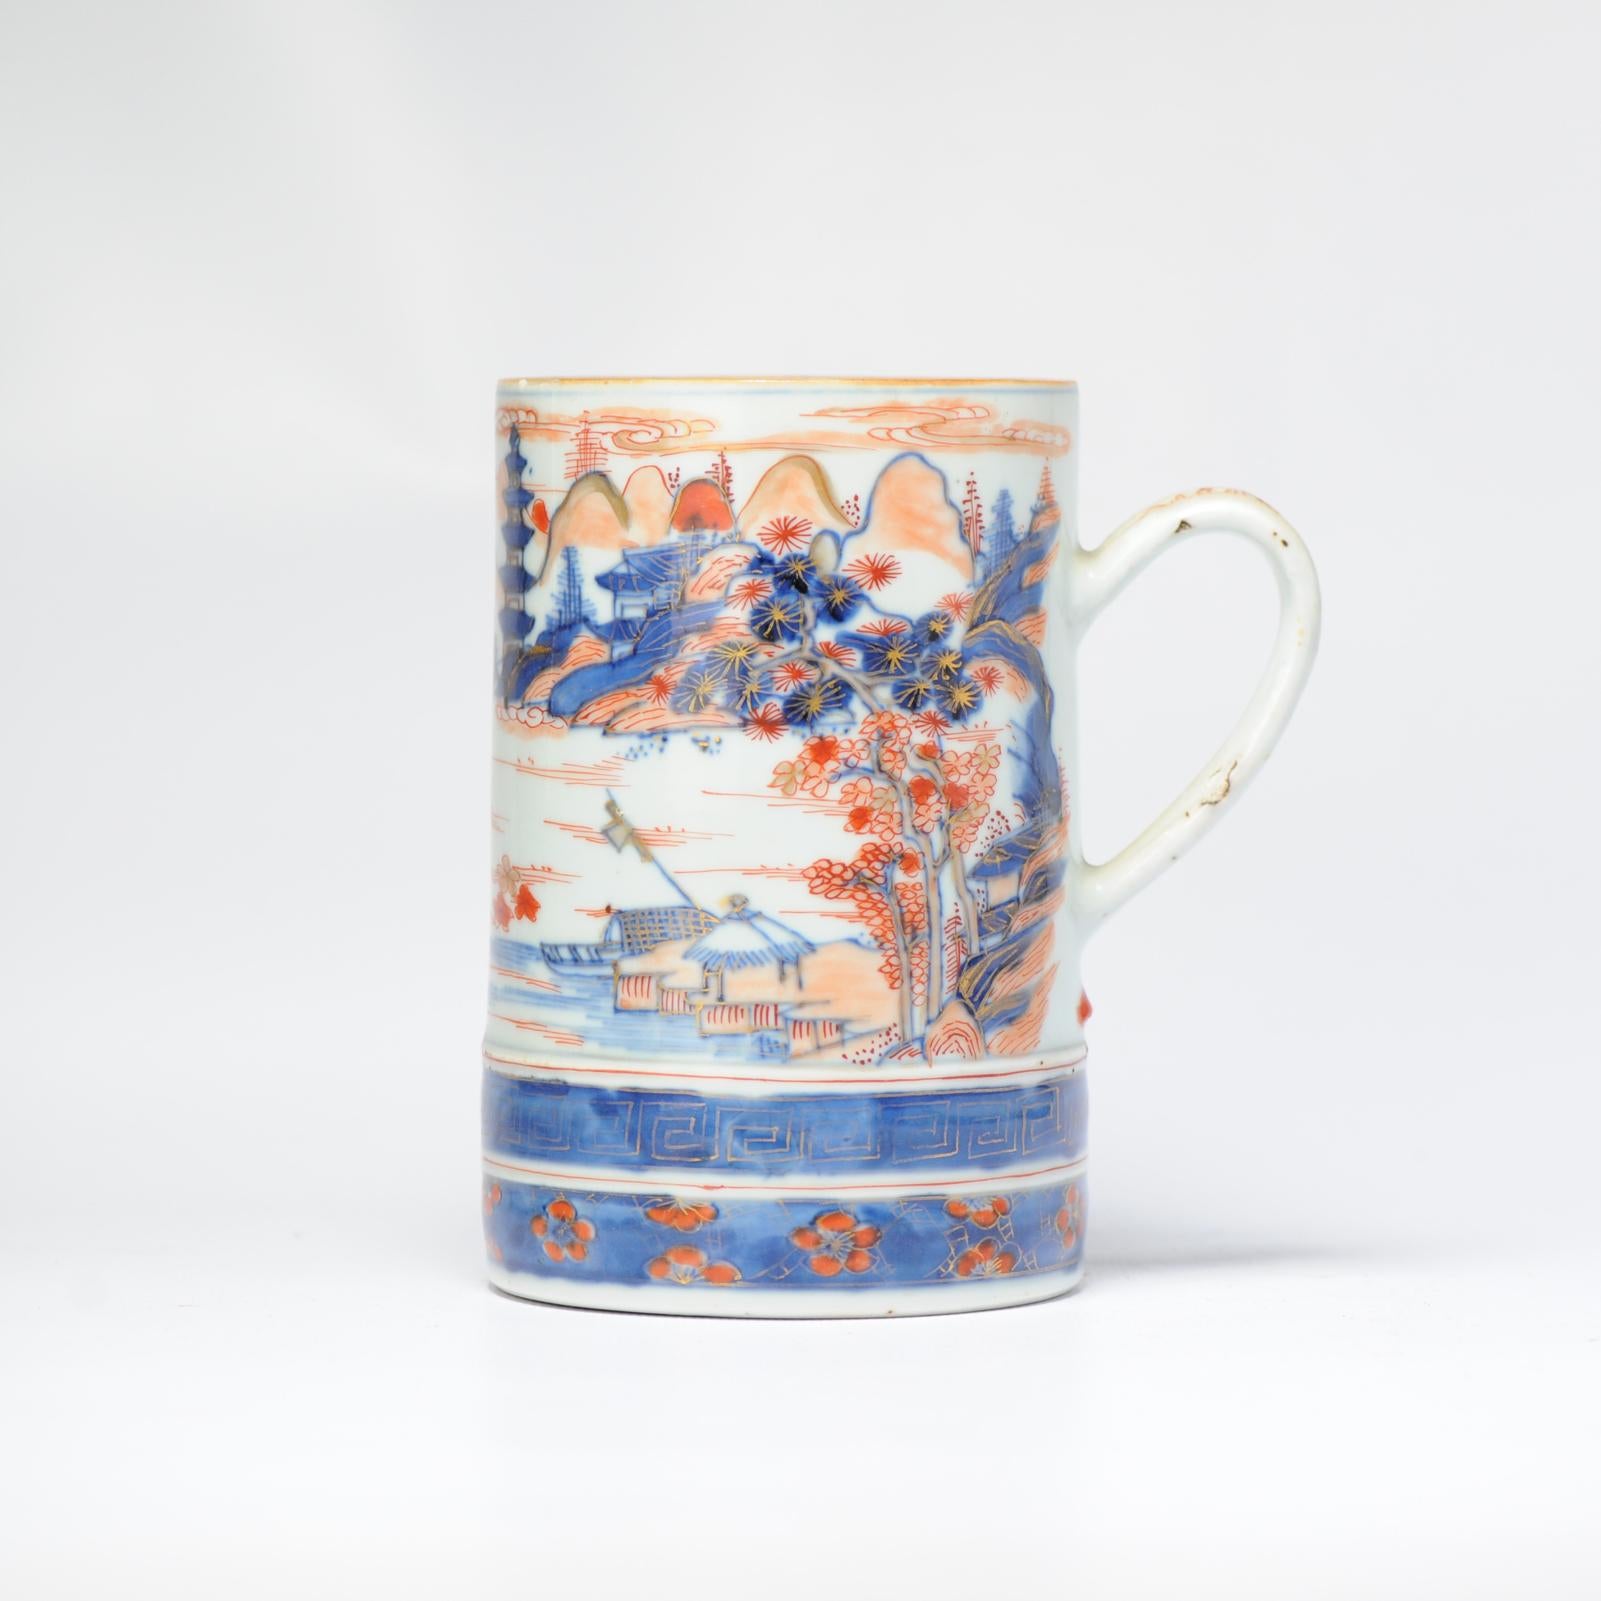 Description
Kangxi period 17/18th century chinese porcelain Imari Tankard. Depicting a landscape scene. High quality painting.

Condition
Some dirt. 1 chip to rim. Fritting to handle and 1 chip to body. Size 163mm high and 144mm end of upper rim